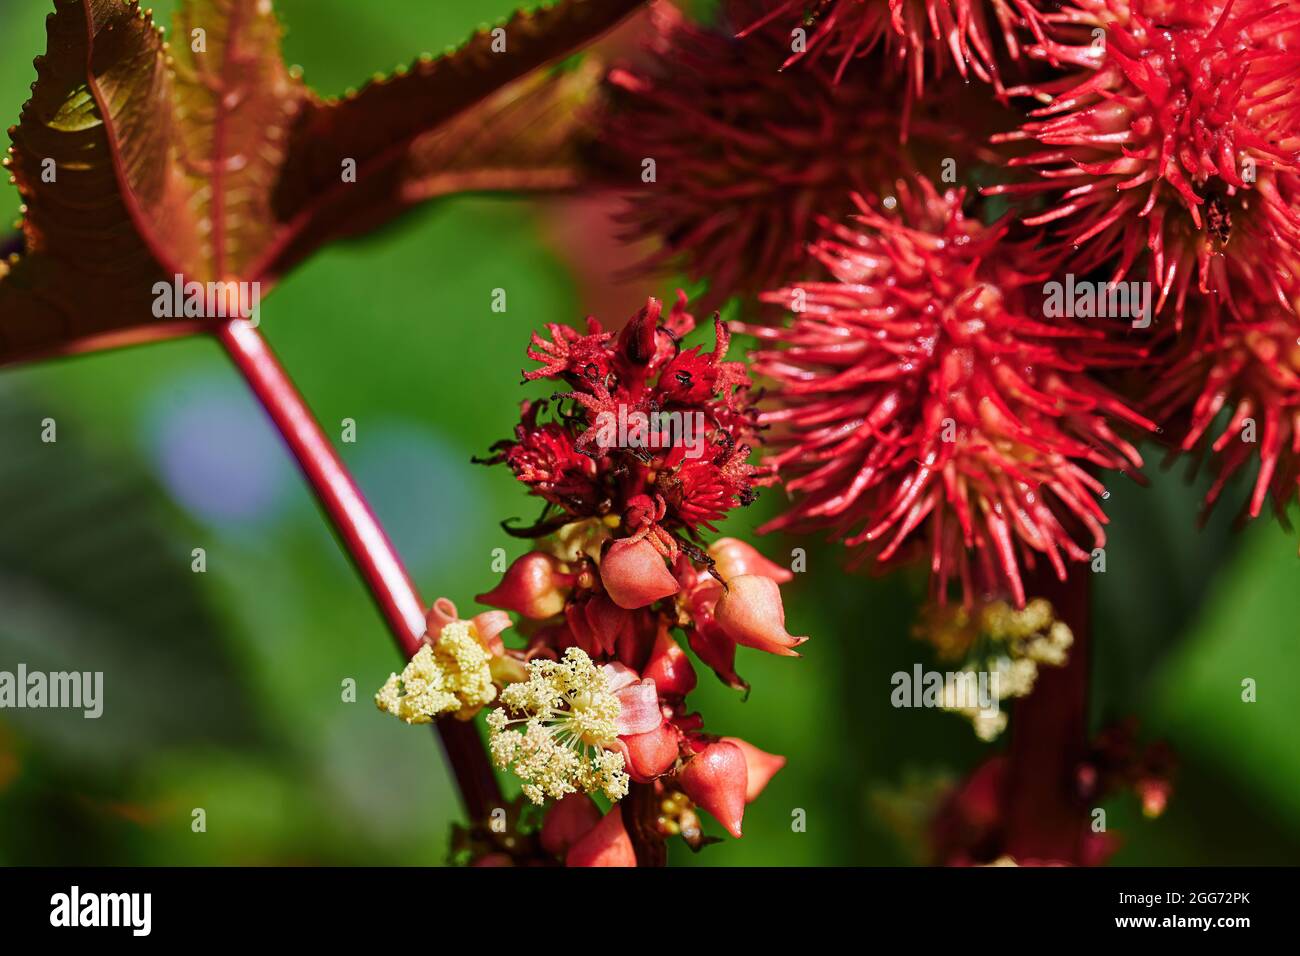 Blossoms and red fruits of a Castor oil plant (Ricinus communis) in the sunshine. Stock Photo